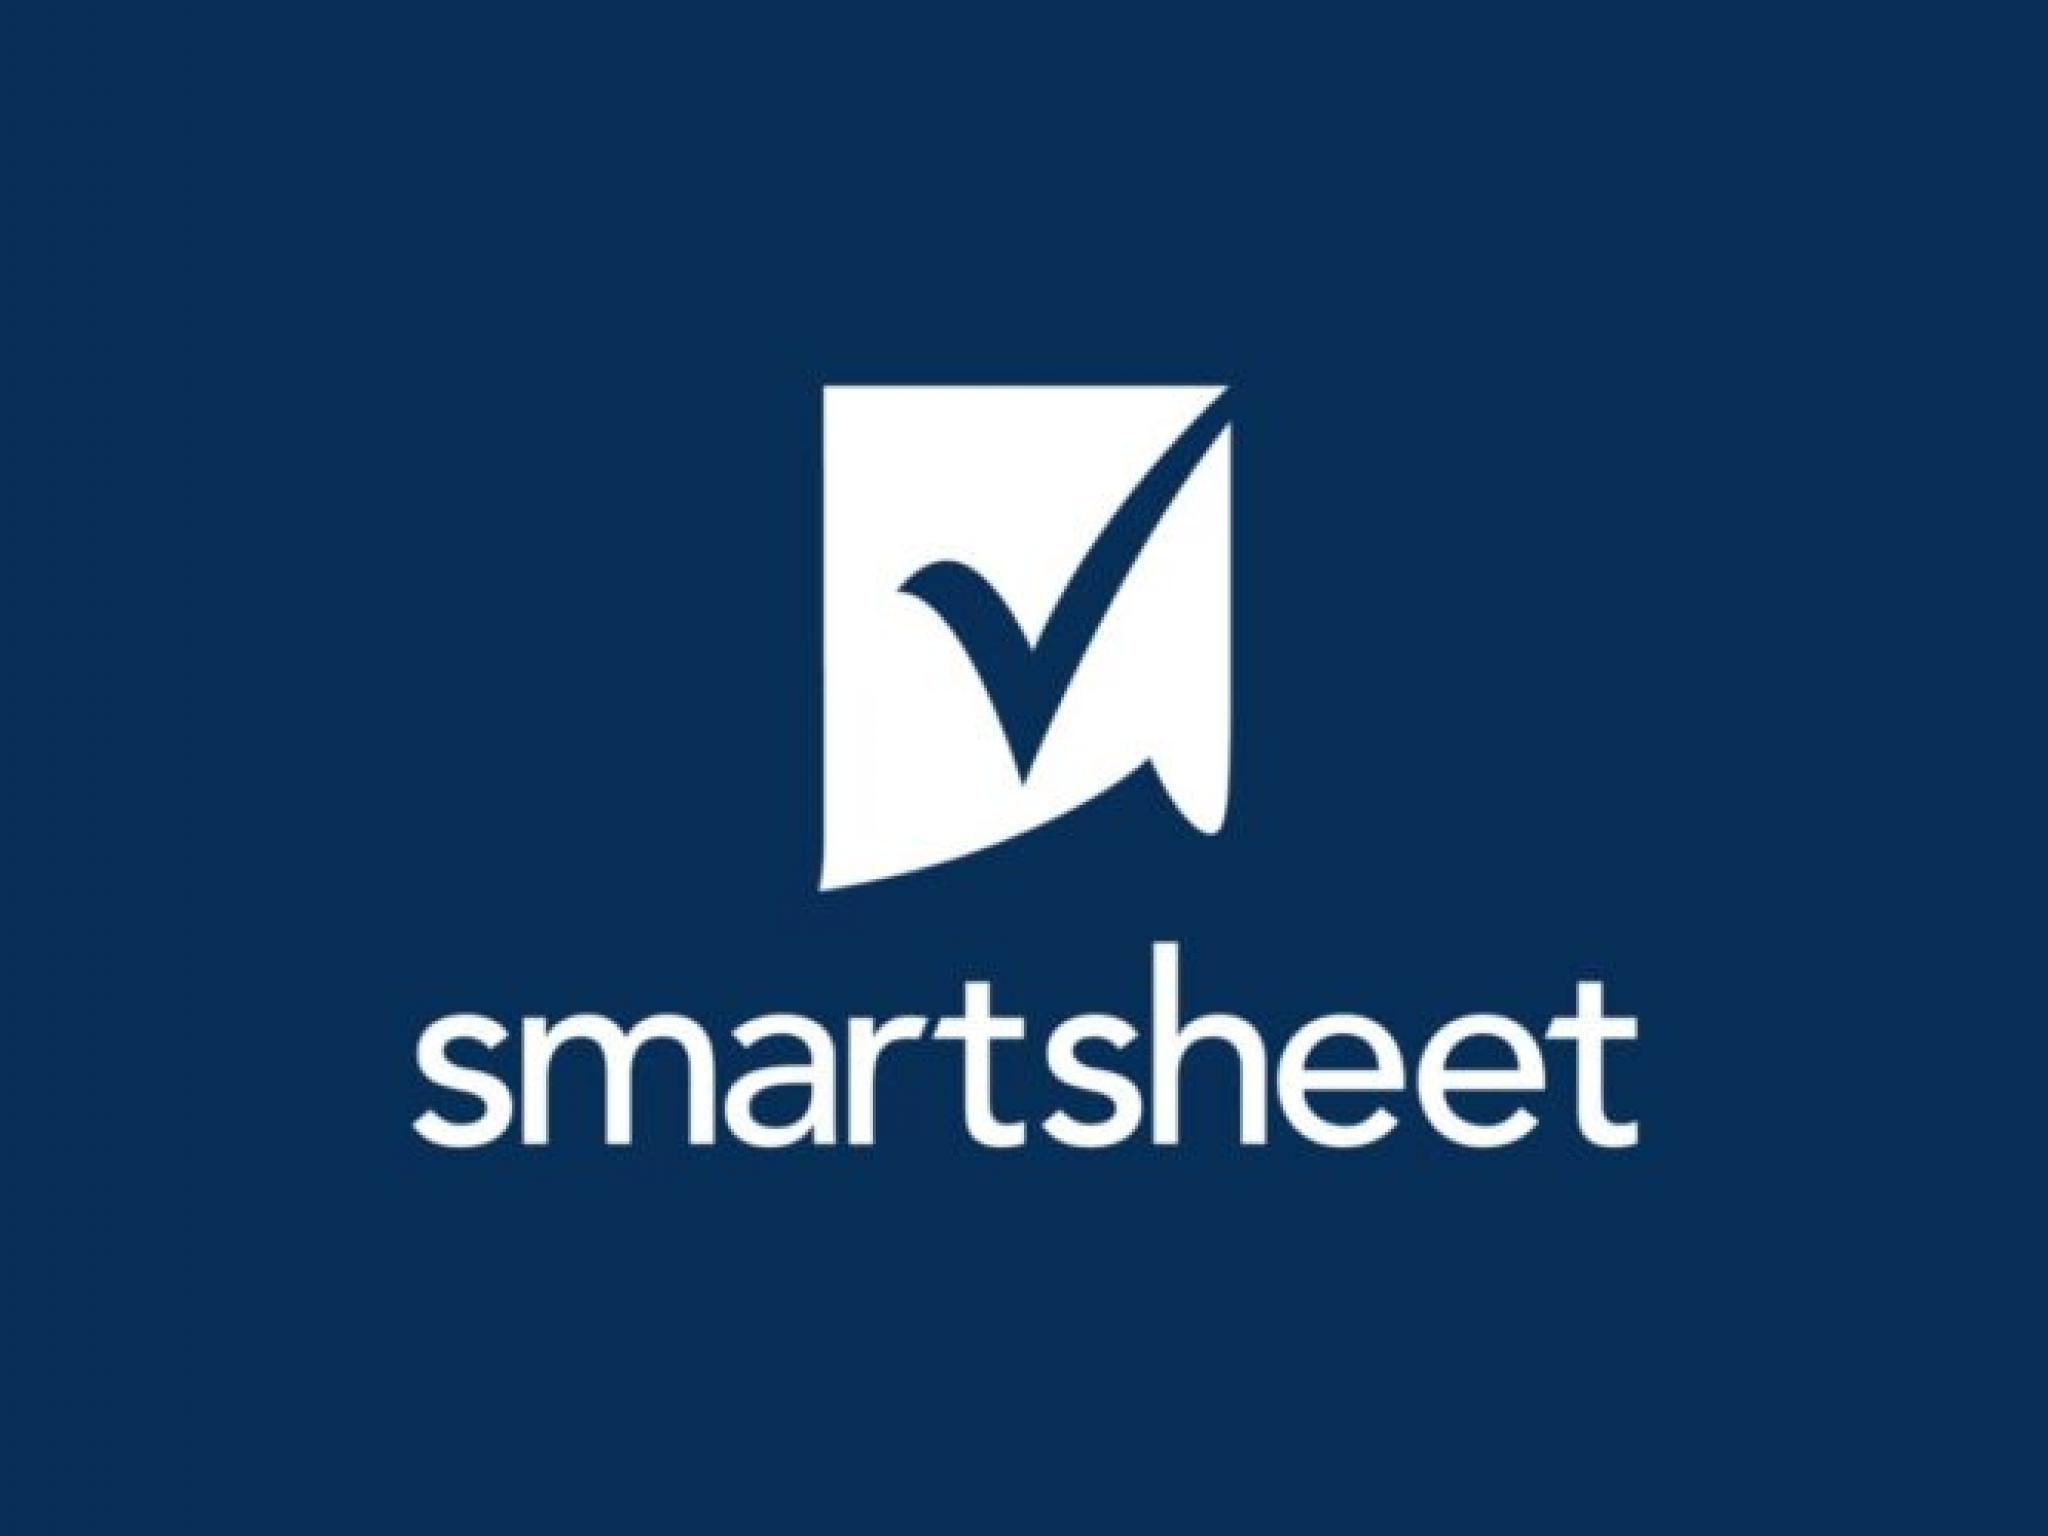  why-smartsheet-shares-are-trading-higher-by-13-here-are-20-stocks-moving-premarket 